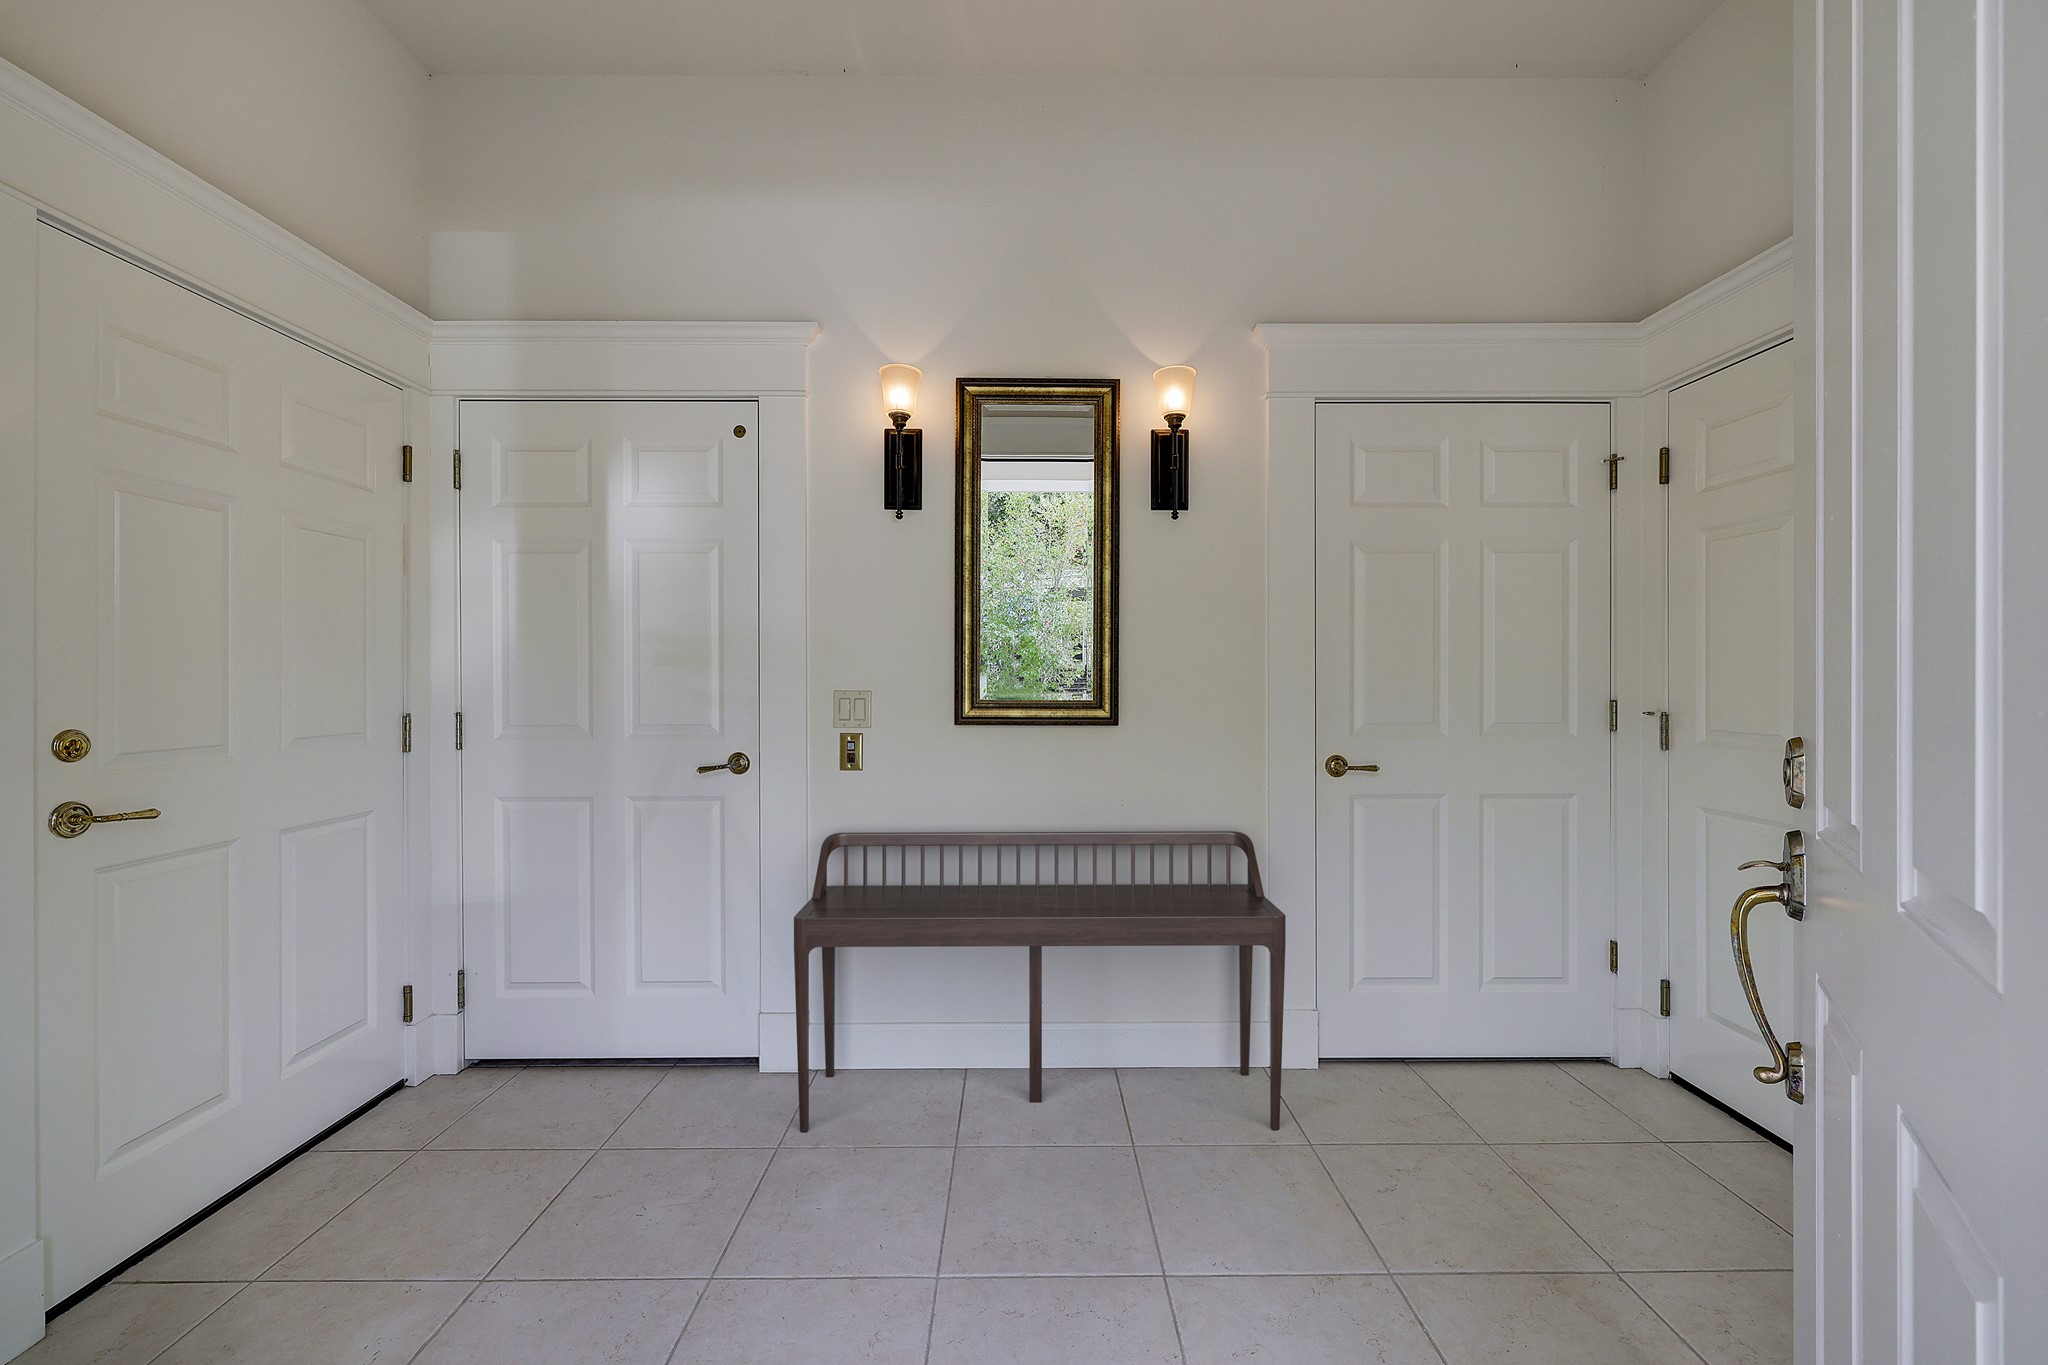 The charming foyer is your entrance to both stylish living and practical amenities, such as a central vacuum system, wired and wireless internet, hardscaped covered back patio with a small fenced yard, dual HVAC systems, dual hot-water heaters.